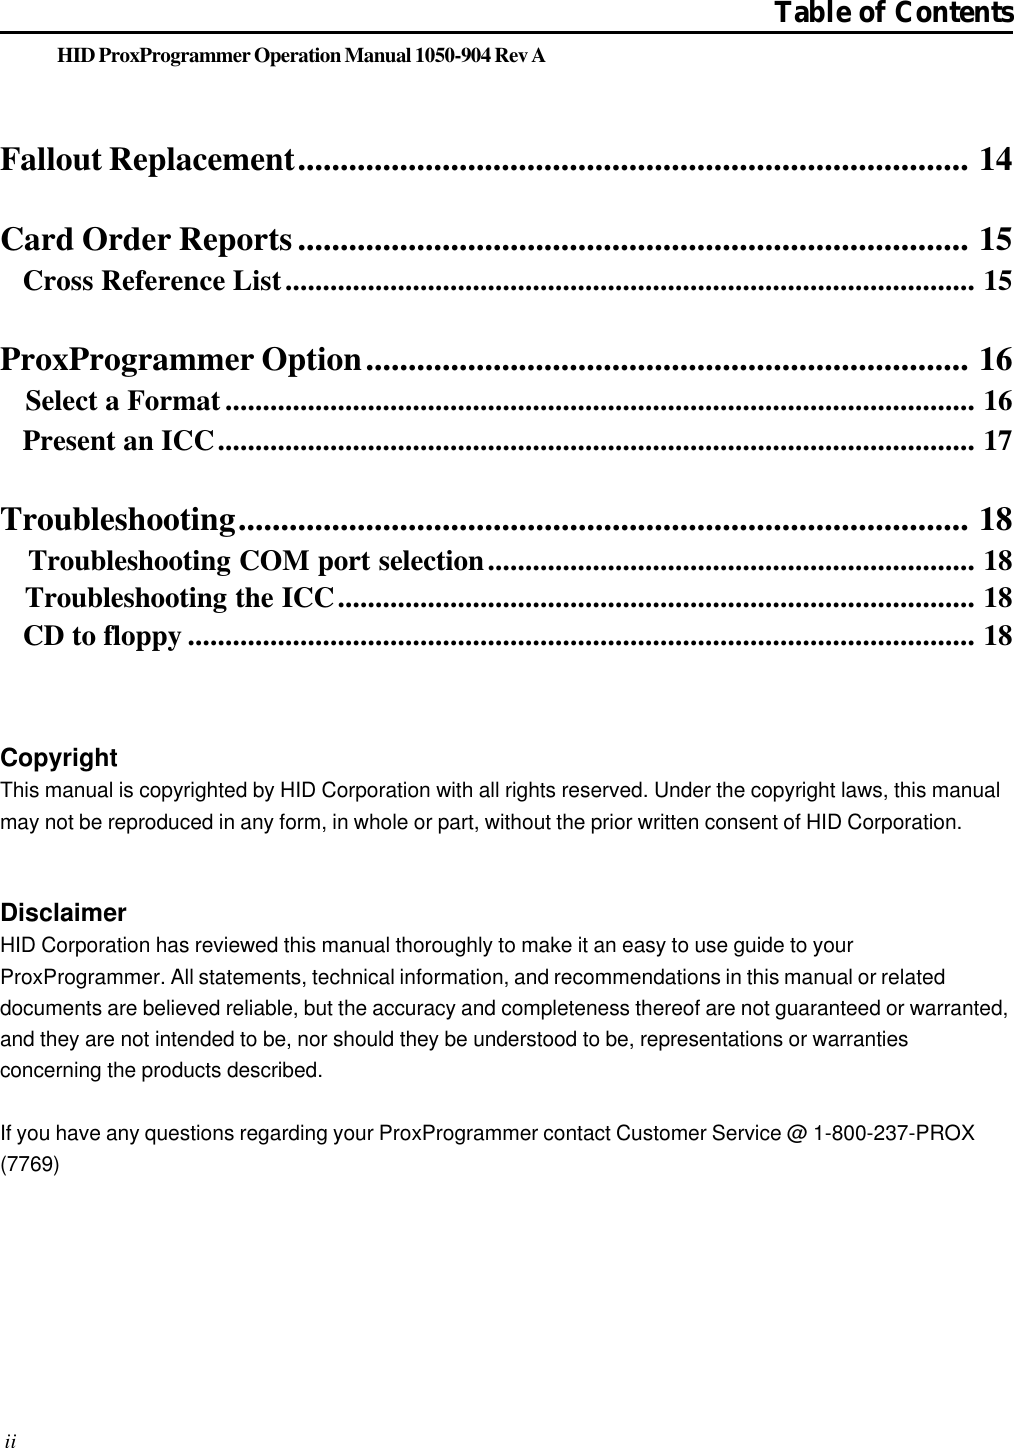 HID ProxProgrammer Operation Manual 1050-904 Rev AFallout Replacement............................................................................... 14Card Order Reports............................................................................... 15   Cross Reference List............................................................................................ 15ProxProgrammer Option....................................................................... 16   Select a Format.................................................................................................... 16   Present an ICC..................................................................................................... 17Troubleshooting...................................................................................... 18   Troubleshooting COM port selection................................................................. 18   Troubleshooting the ICC..................................................................................... 18   CD to floppy ......................................................................................................... 18Table of ContentsCopyrightThis manual is copyrighted by HID Corporation with all rights reserved. Under the copyright laws, this manualmay not be reproduced in any form, in whole or part, without the prior written consent of HID Corporation.DisclaimerHID Corporation has reviewed this manual thoroughly to make it an easy to use guide to yourProxProgrammer. All statements, technical information, and recommendations in this manual or relateddocuments are believed reliable, but the accuracy and completeness thereof are not guaranteed or warranted,and they are not intended to be, nor should they be understood to be, representations or warrantiesconcerning the products described.If you have any questions regarding your ProxProgrammer contact Customer Service @ 1-800-237-PROX(7769) ii